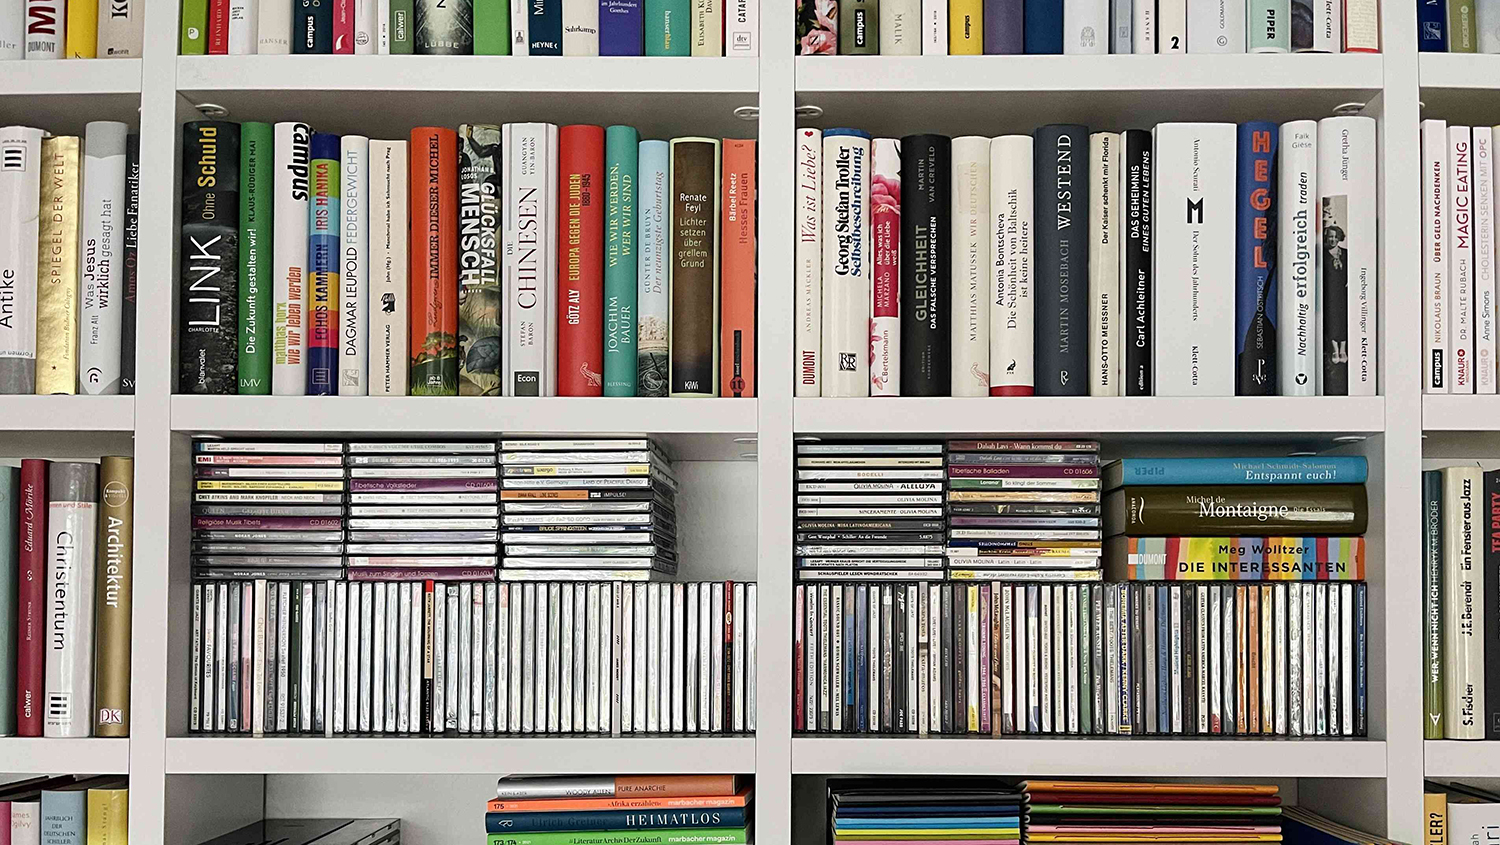 Image of a bookshelf holding books and CDs